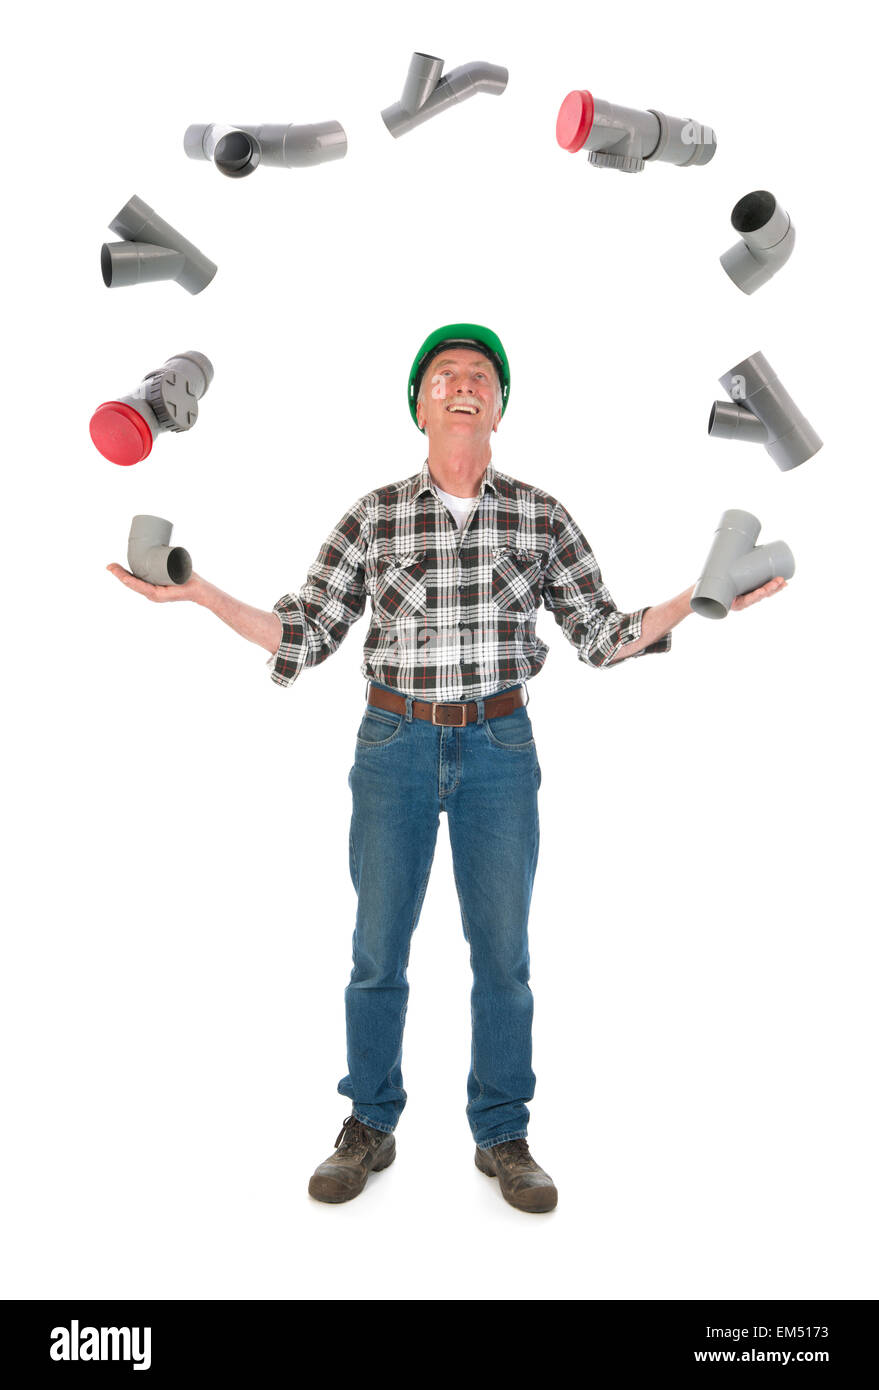 Juggling plumber with PVC tubes Stock Photo